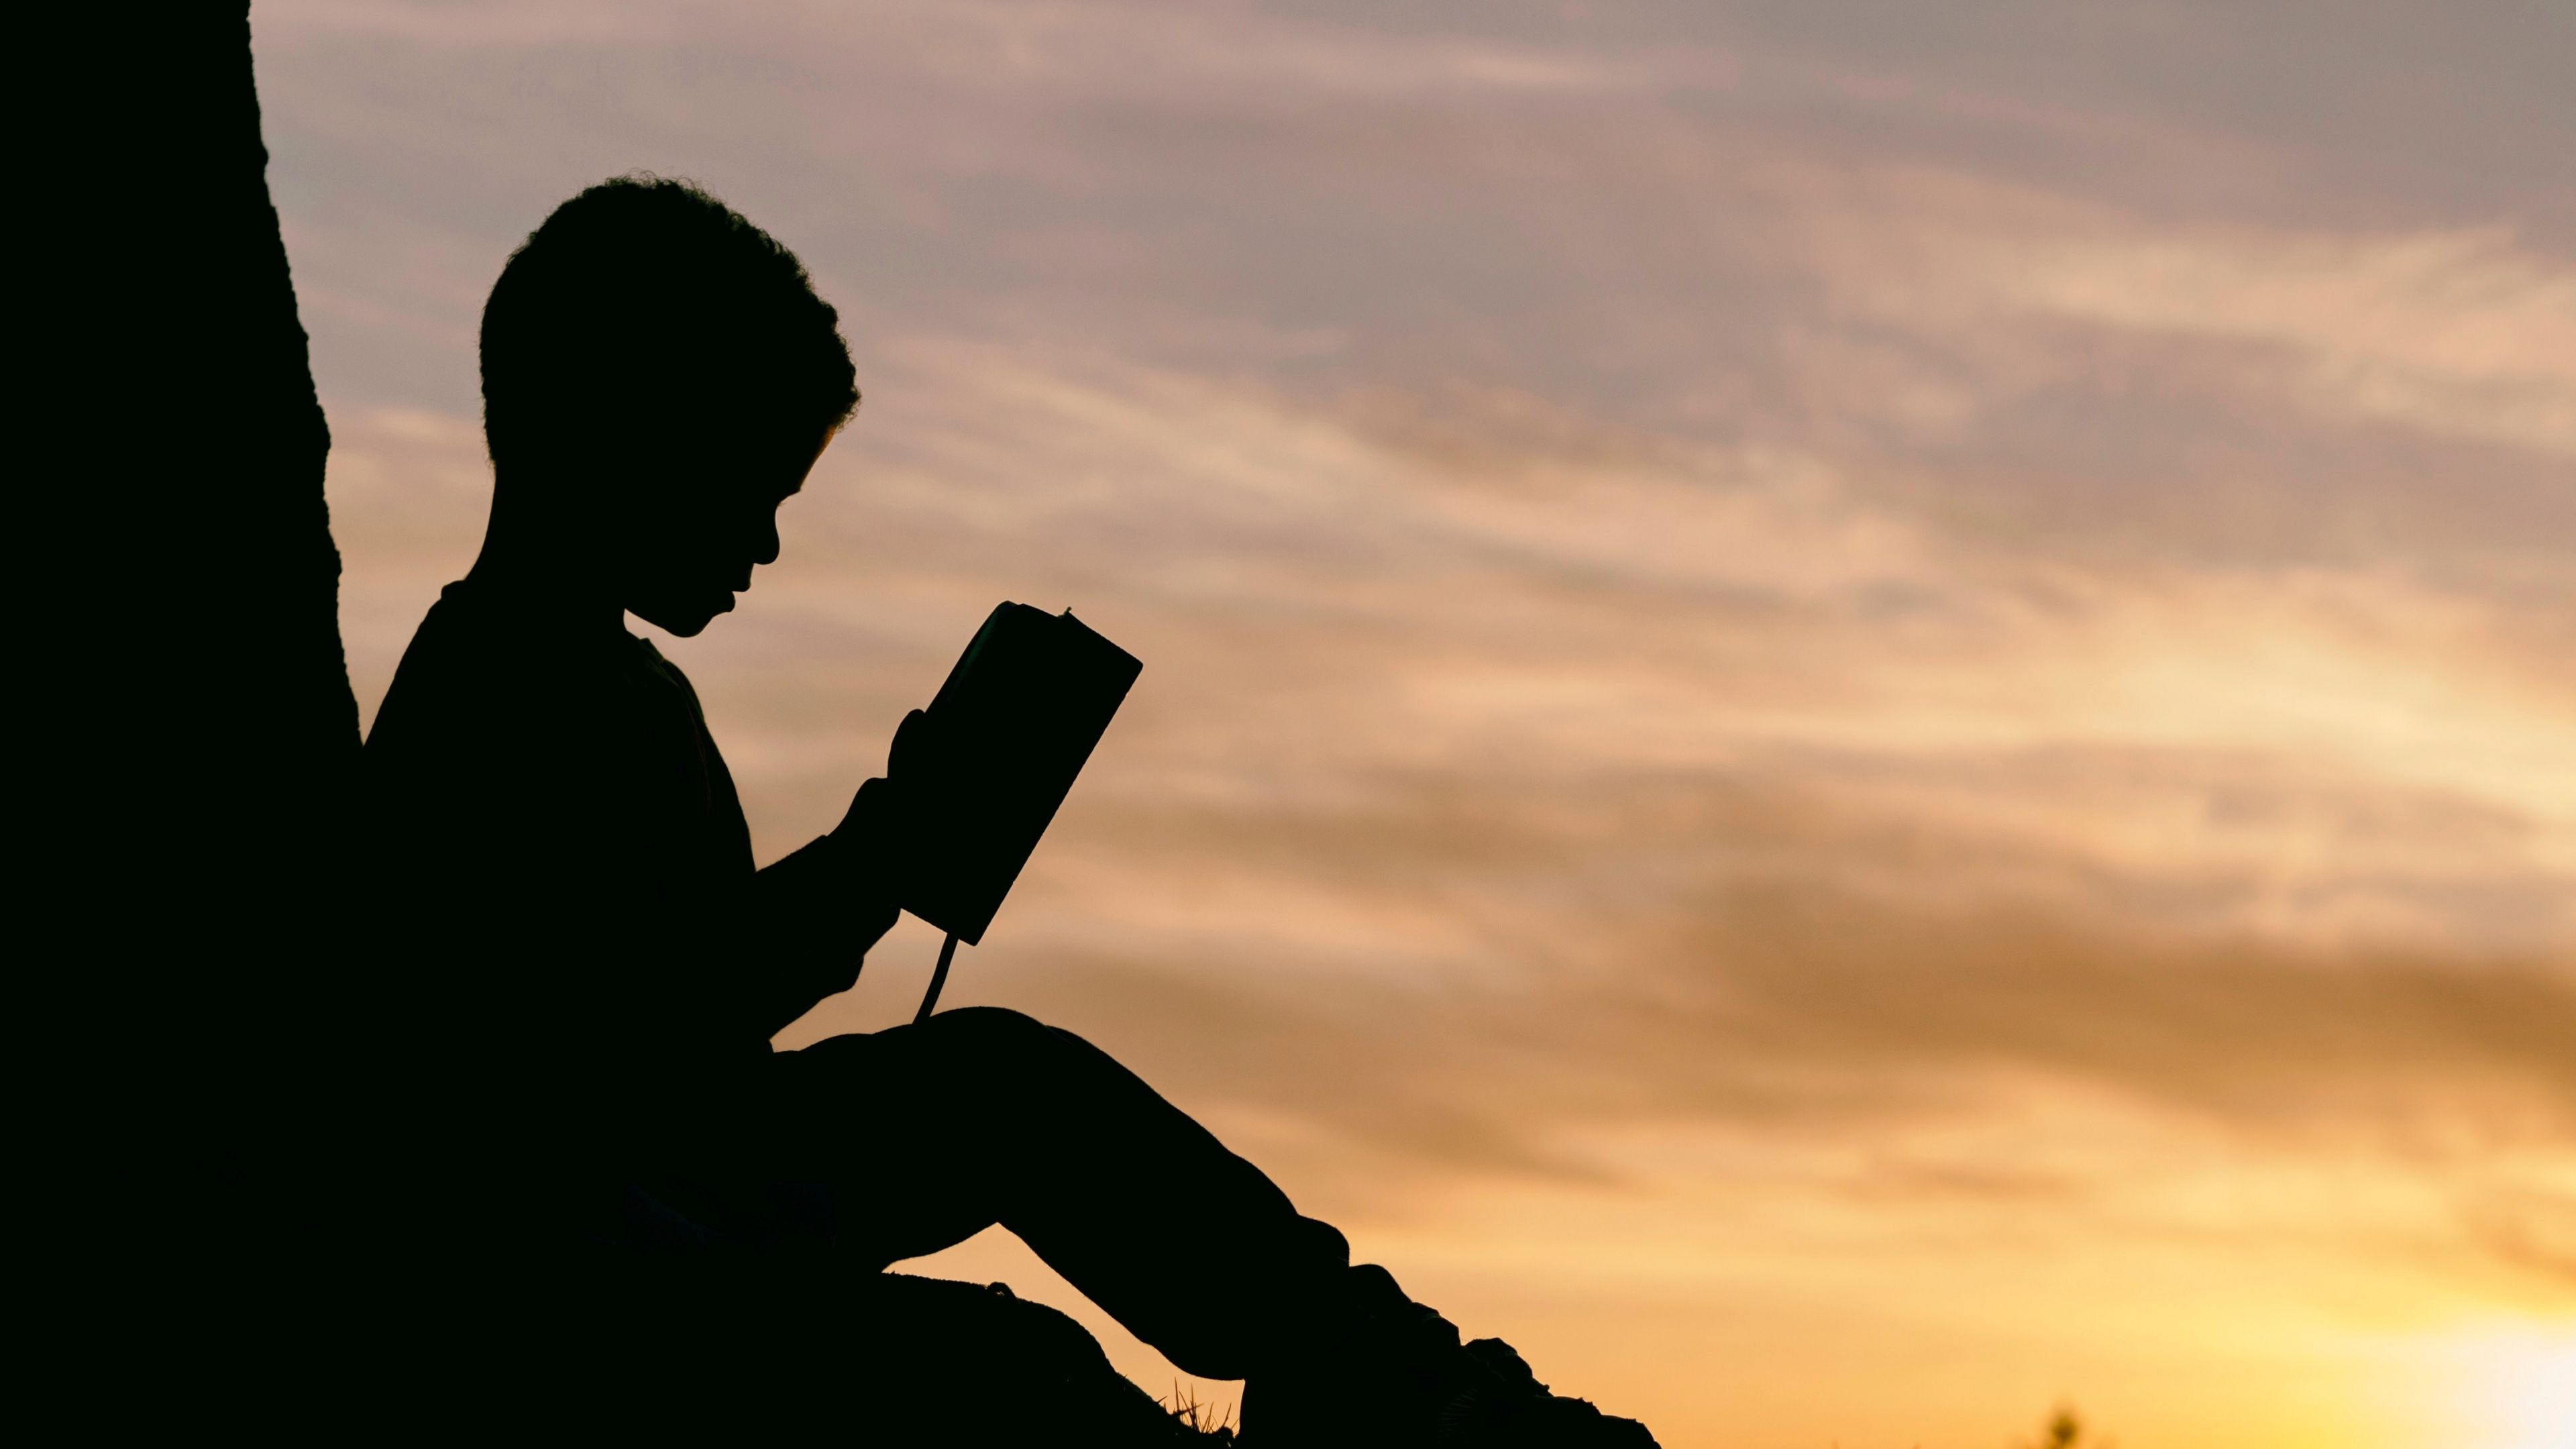 Childhood dreams, Silhouetted reading, Sunset escapades, Fish-shaped stories, 3840x2160 4K Desktop